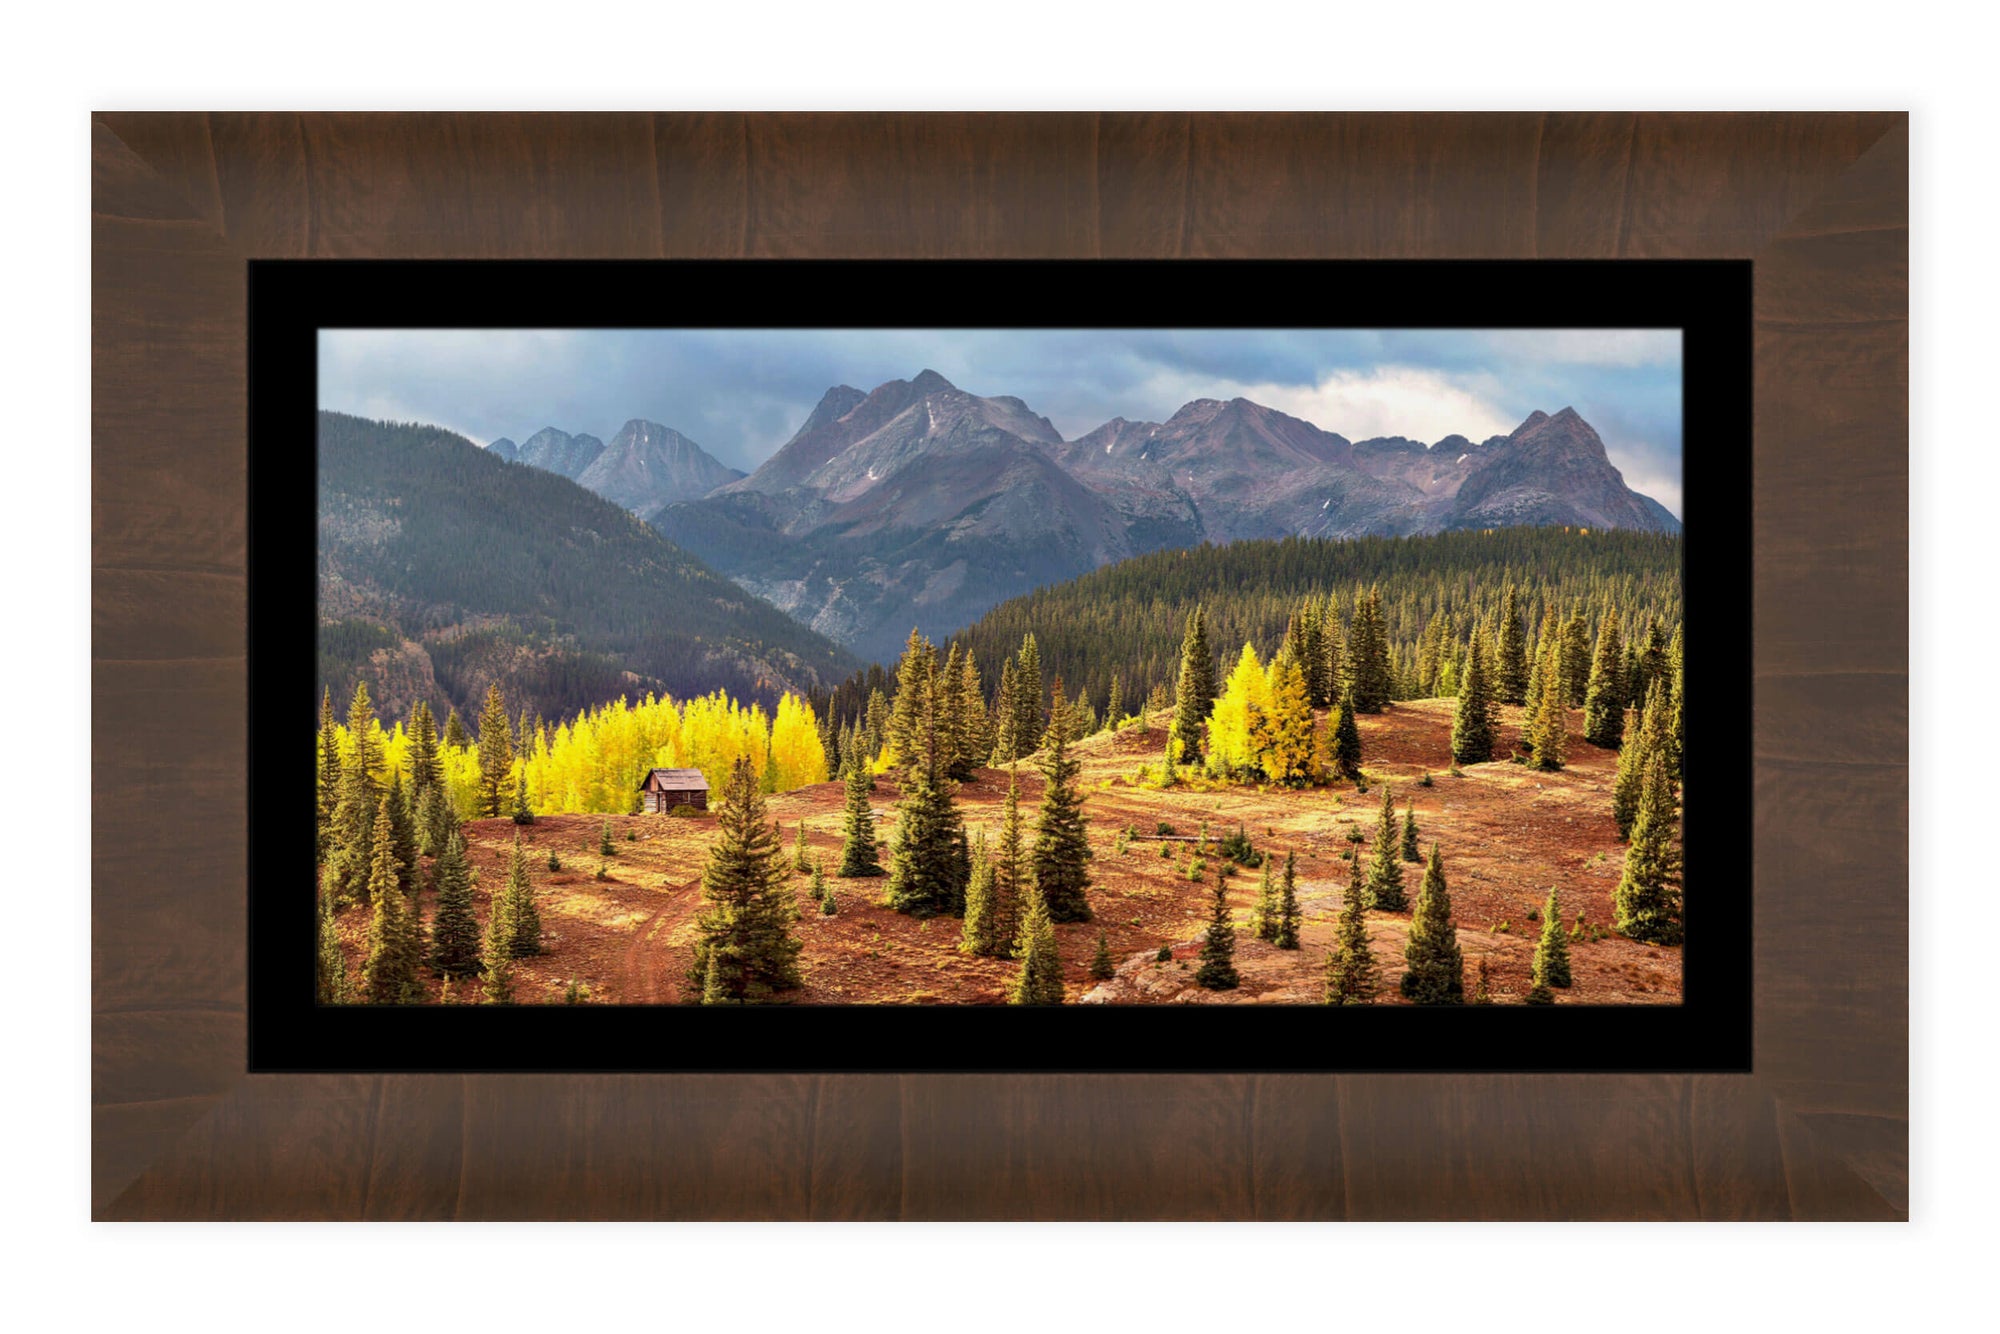 A framed cabin picture from Molas Pass near Silverton during peak Colorado fall.